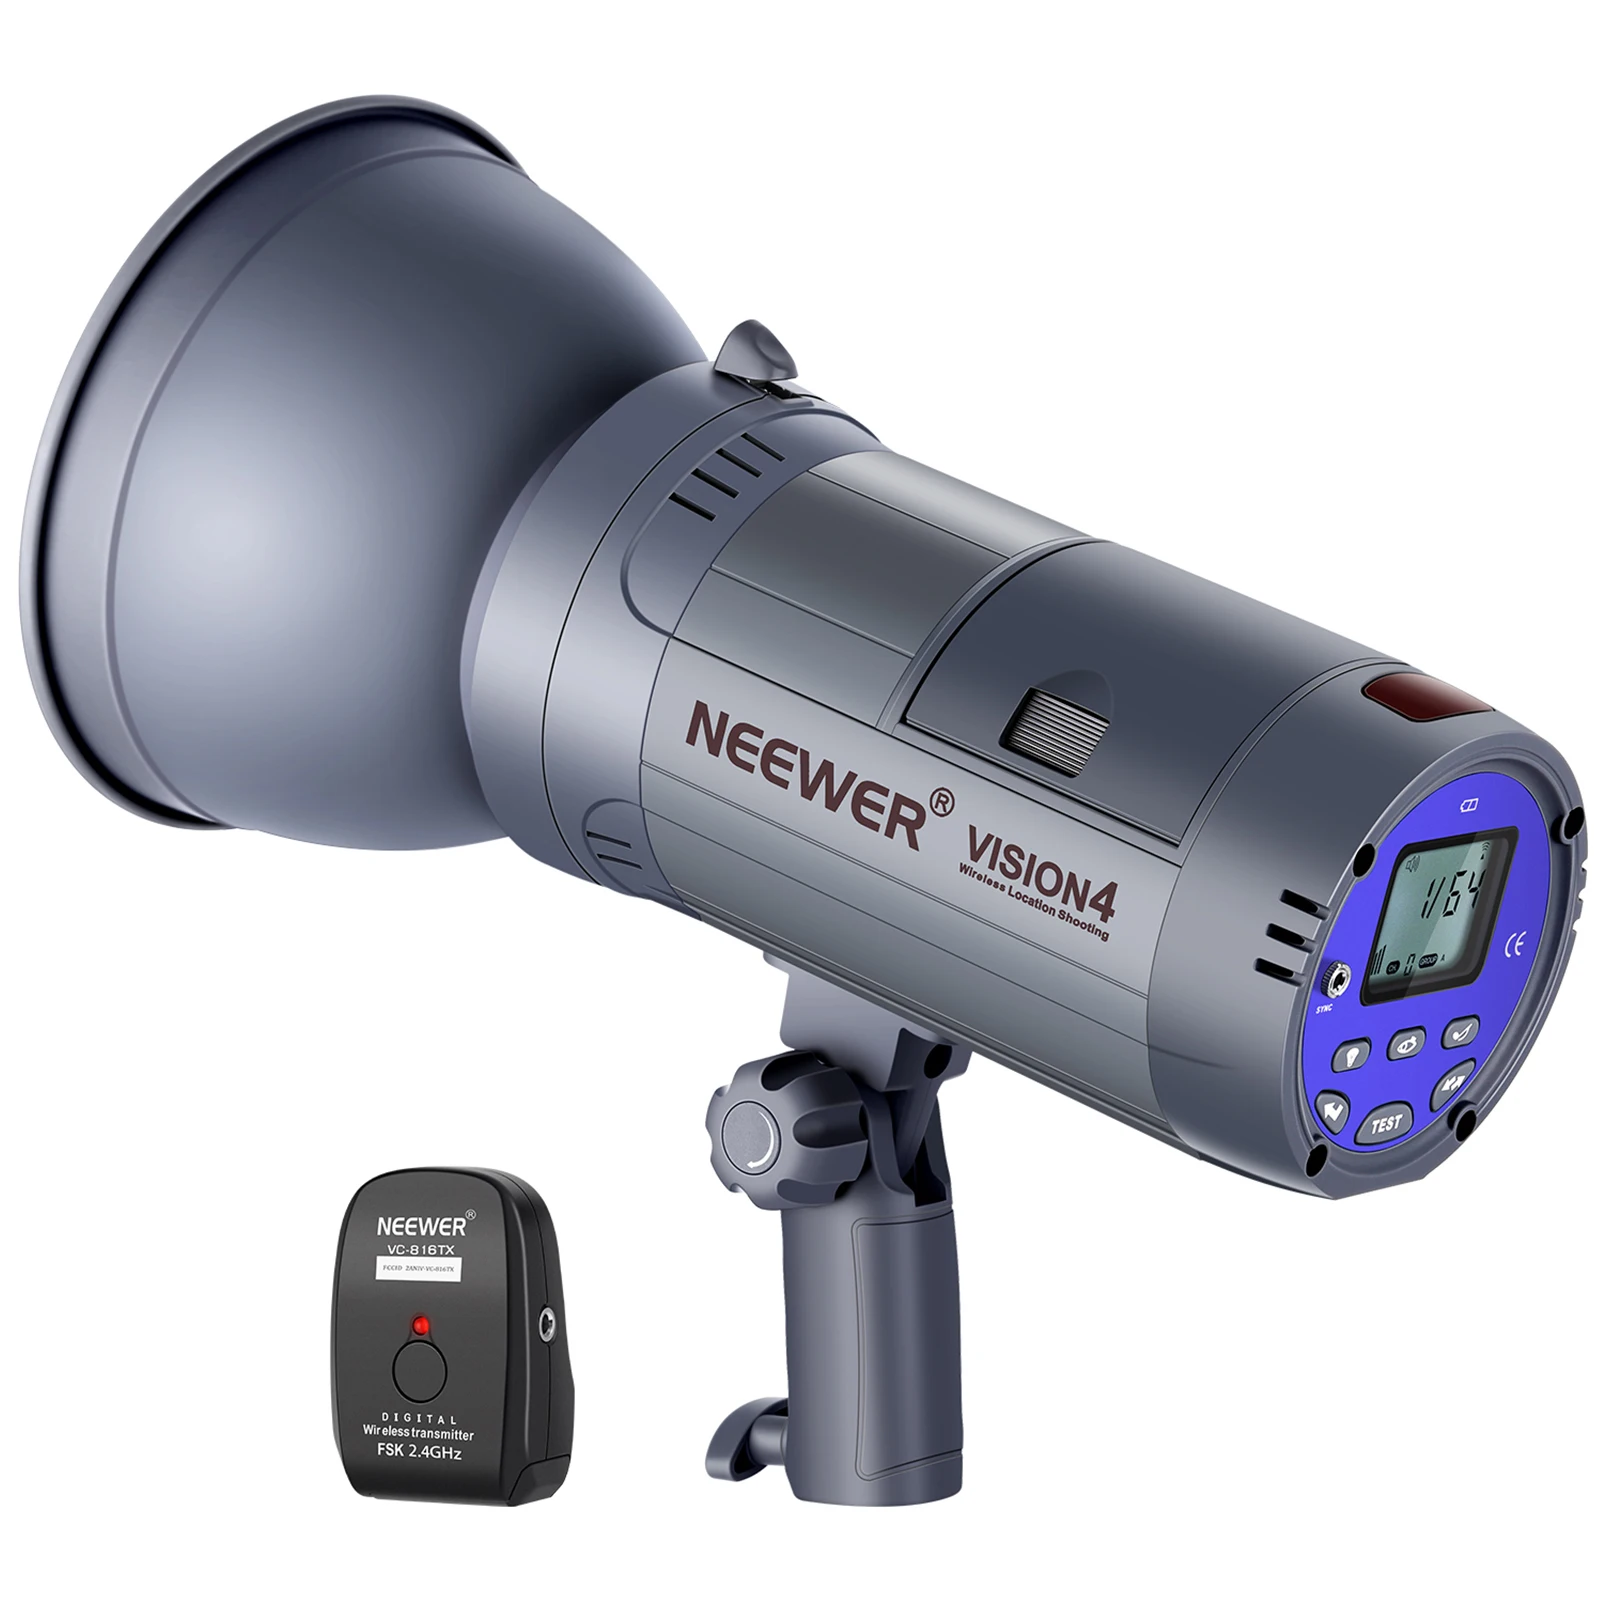 

Neewer Vision 4 300W Outdoor Studio Flash Strobe Li-ion Battery Powered Monolight,1000 Full Power Flashes,Recycle In 0.4-2.5 Sec